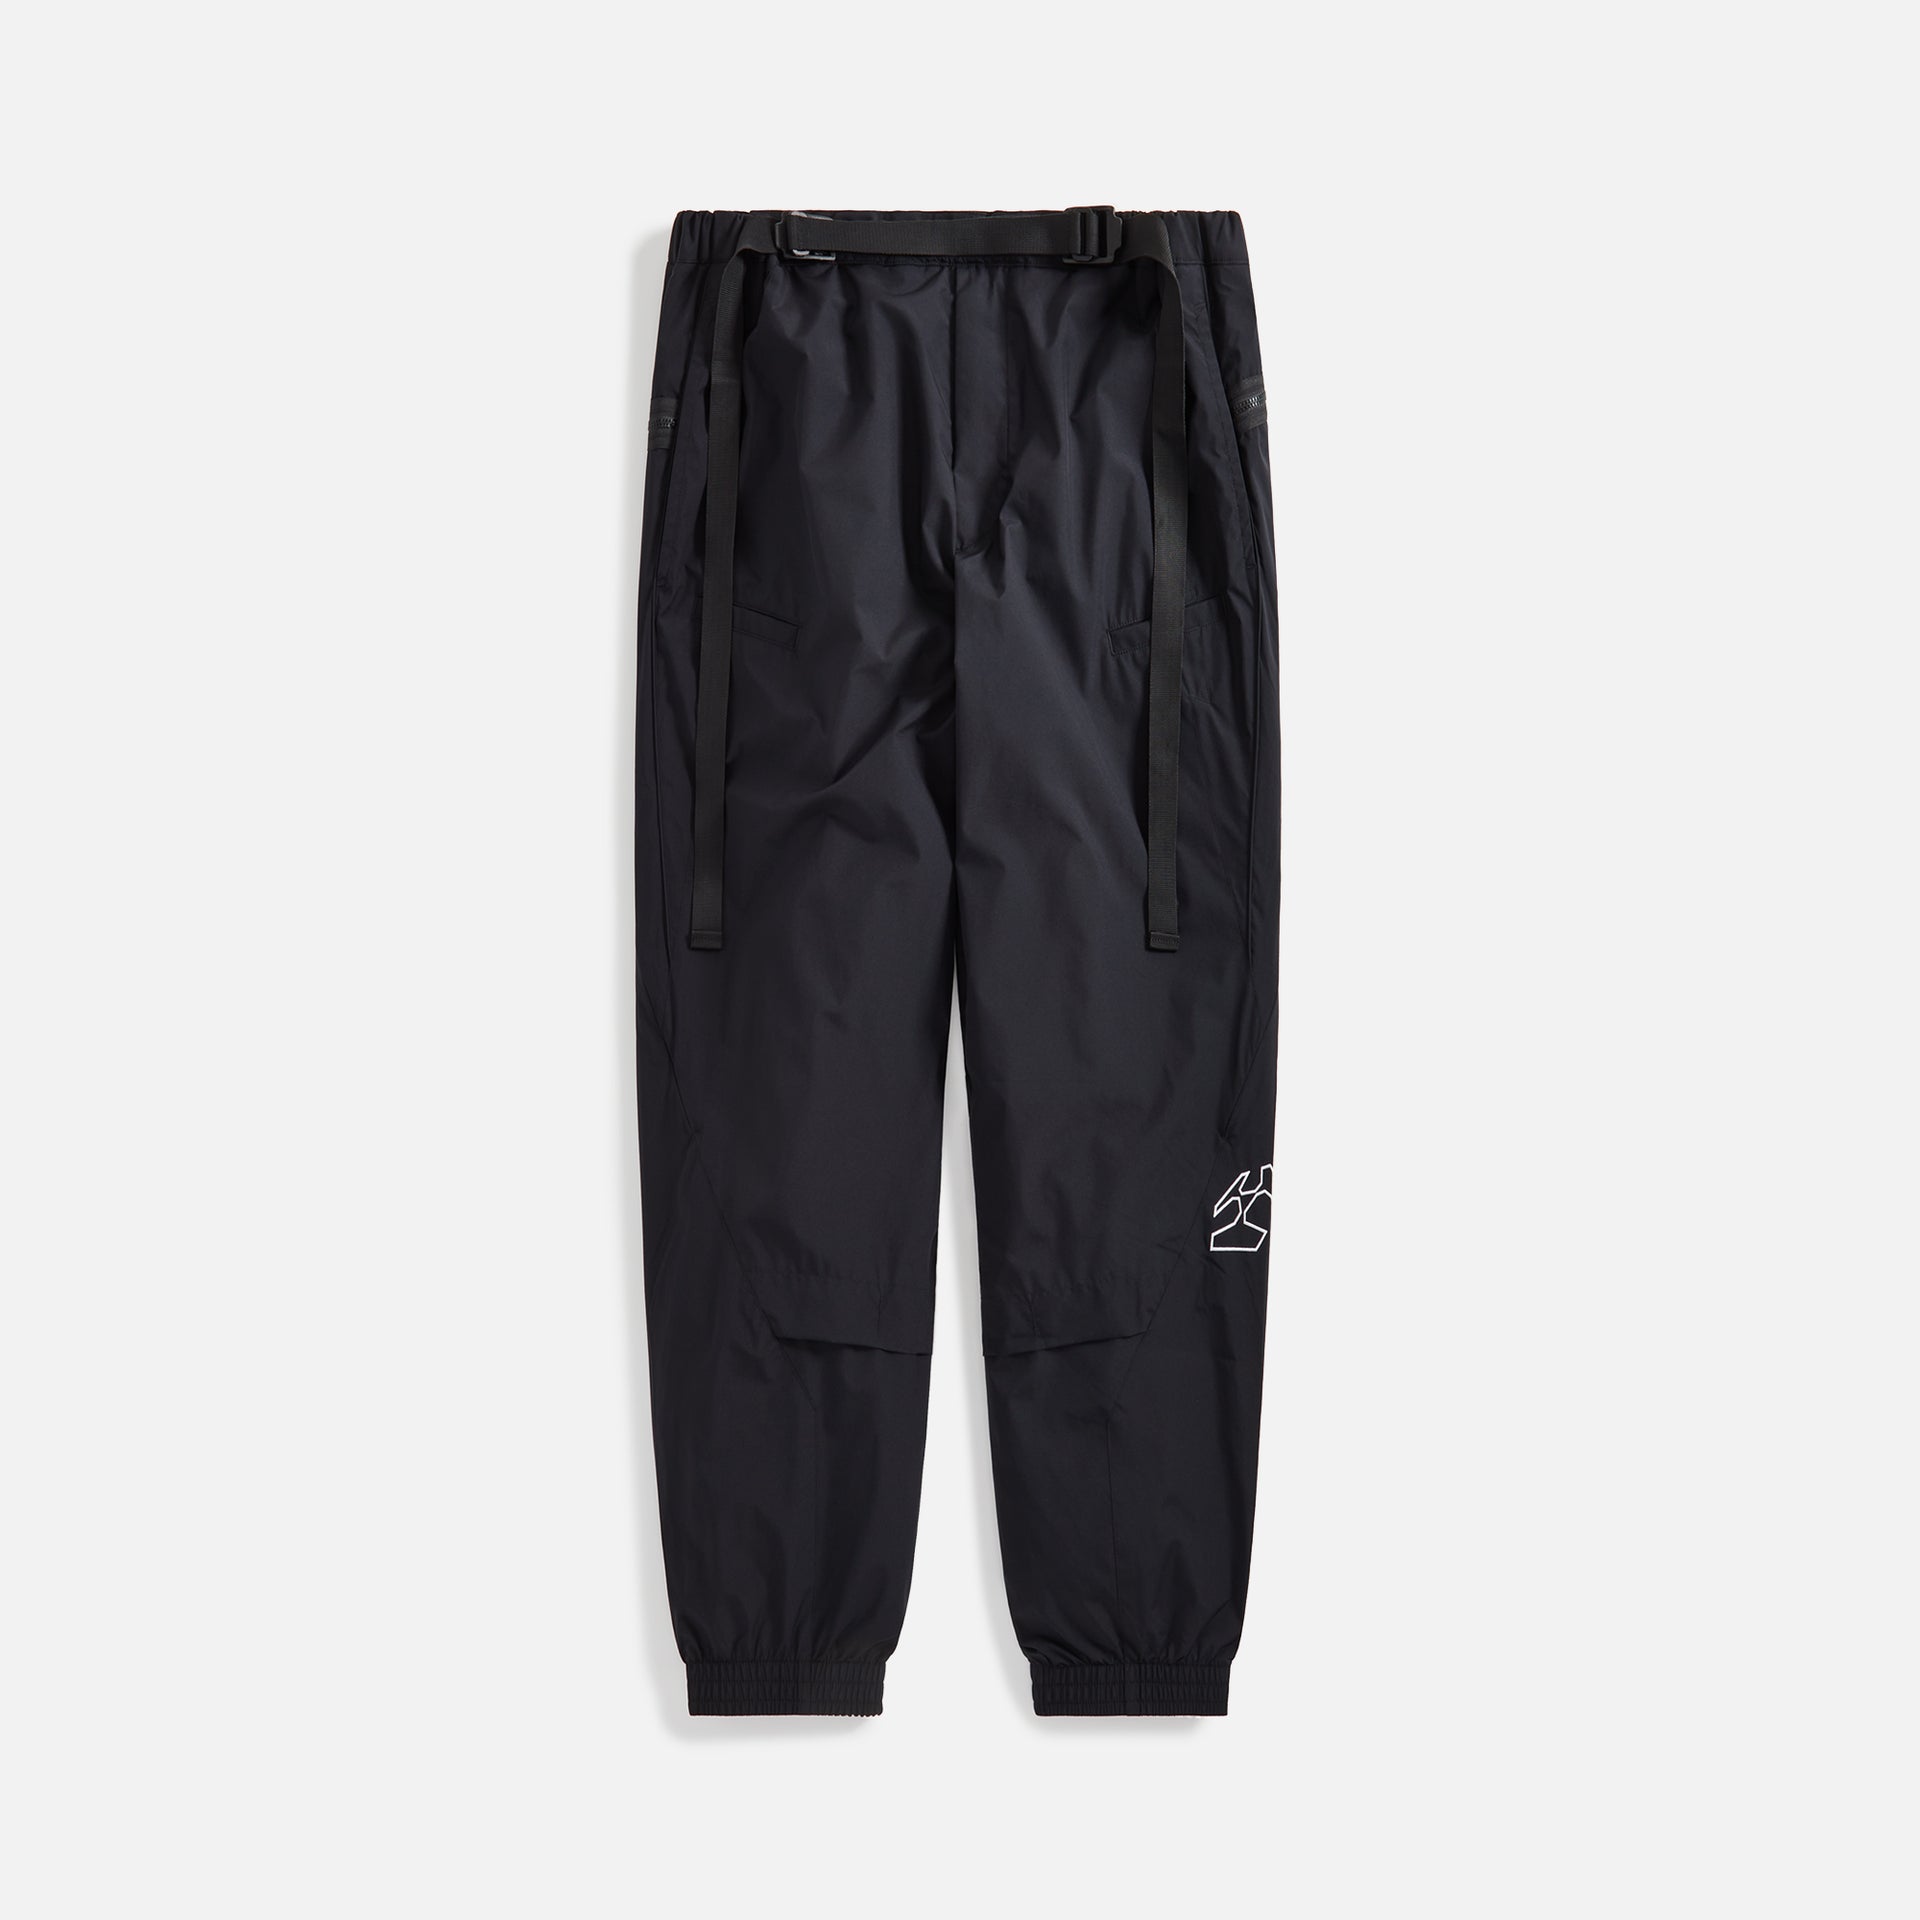 Acronym 2L Gore-Tex® Windstopper® Insulated Vent Pant - Black